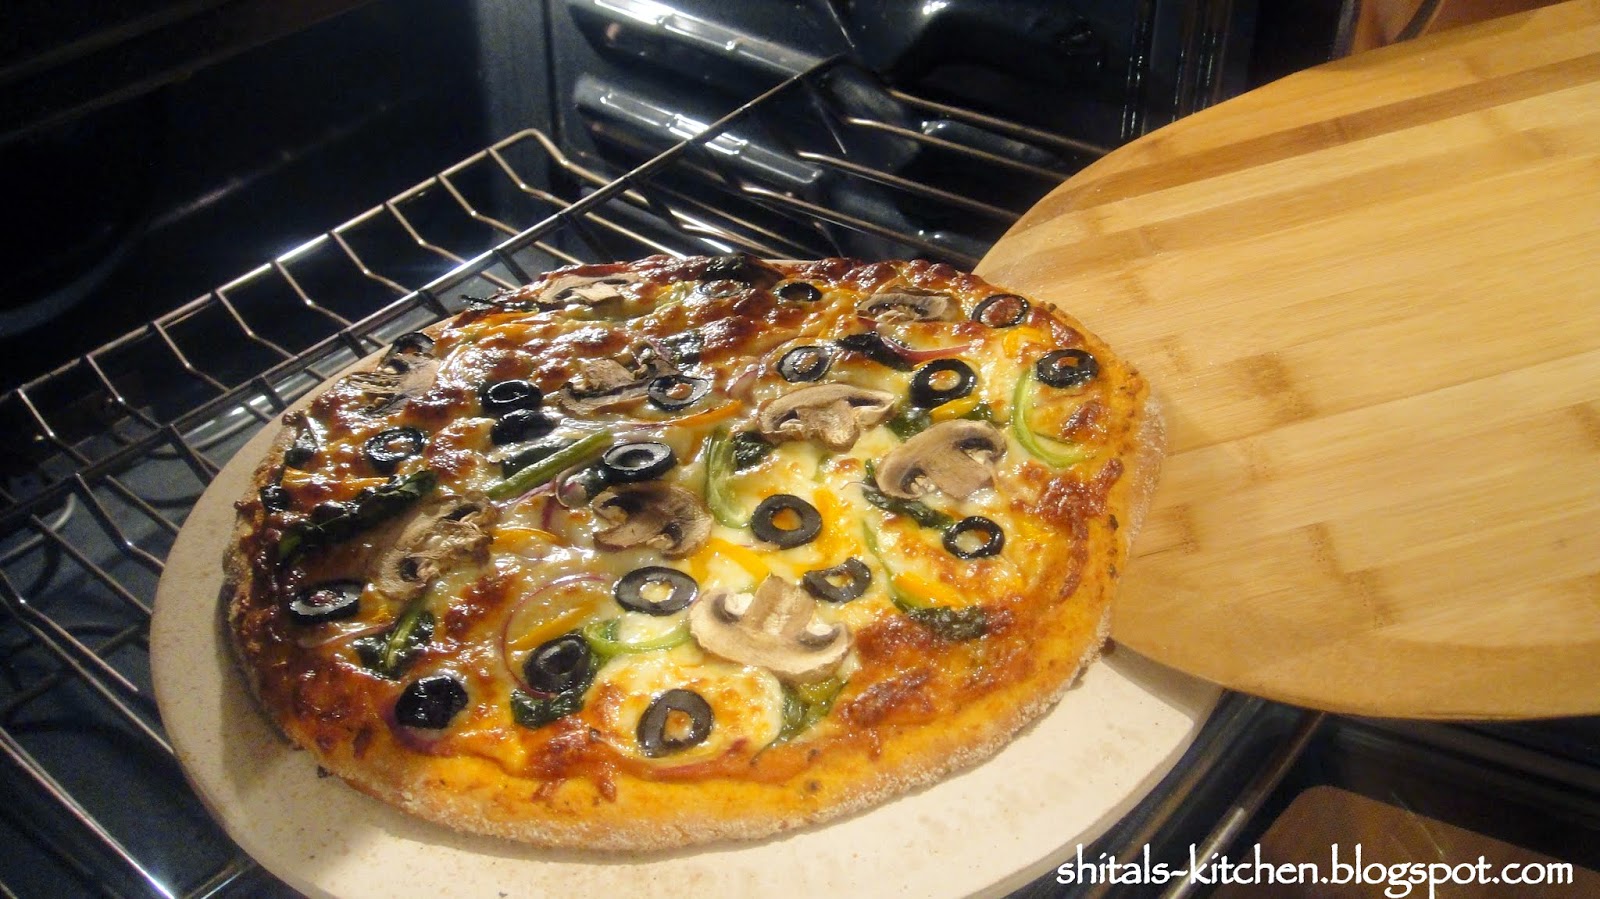 Seasoning Stoneware Baking Pans and Pizza Stones - Instructables